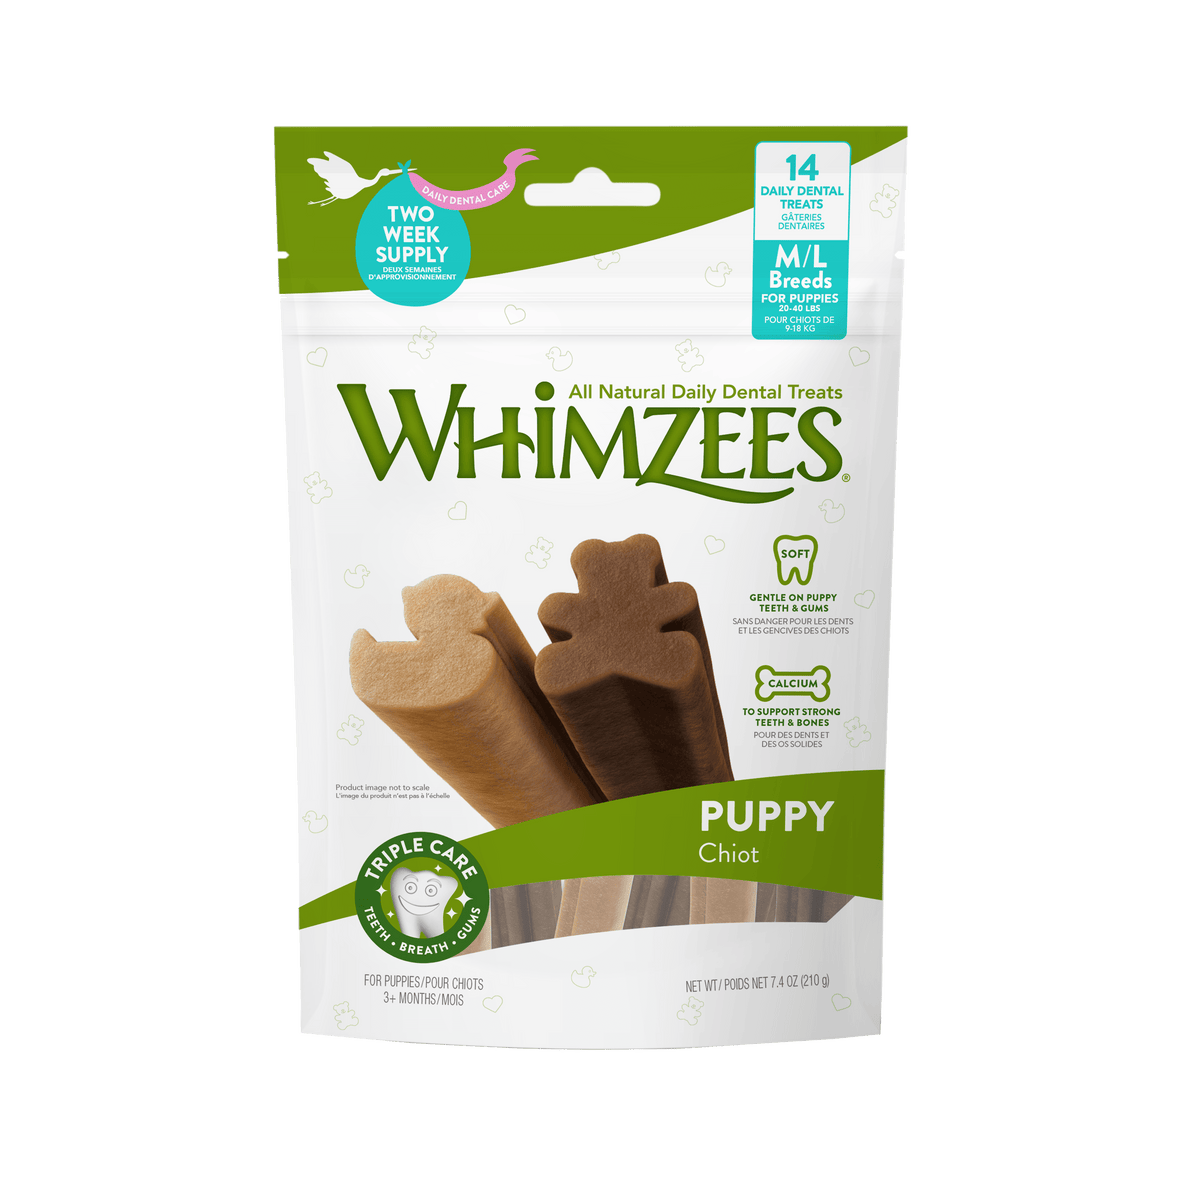 Whimzees Gâteries M/L Gâteries dentaires pour chiots Whimzees puppy